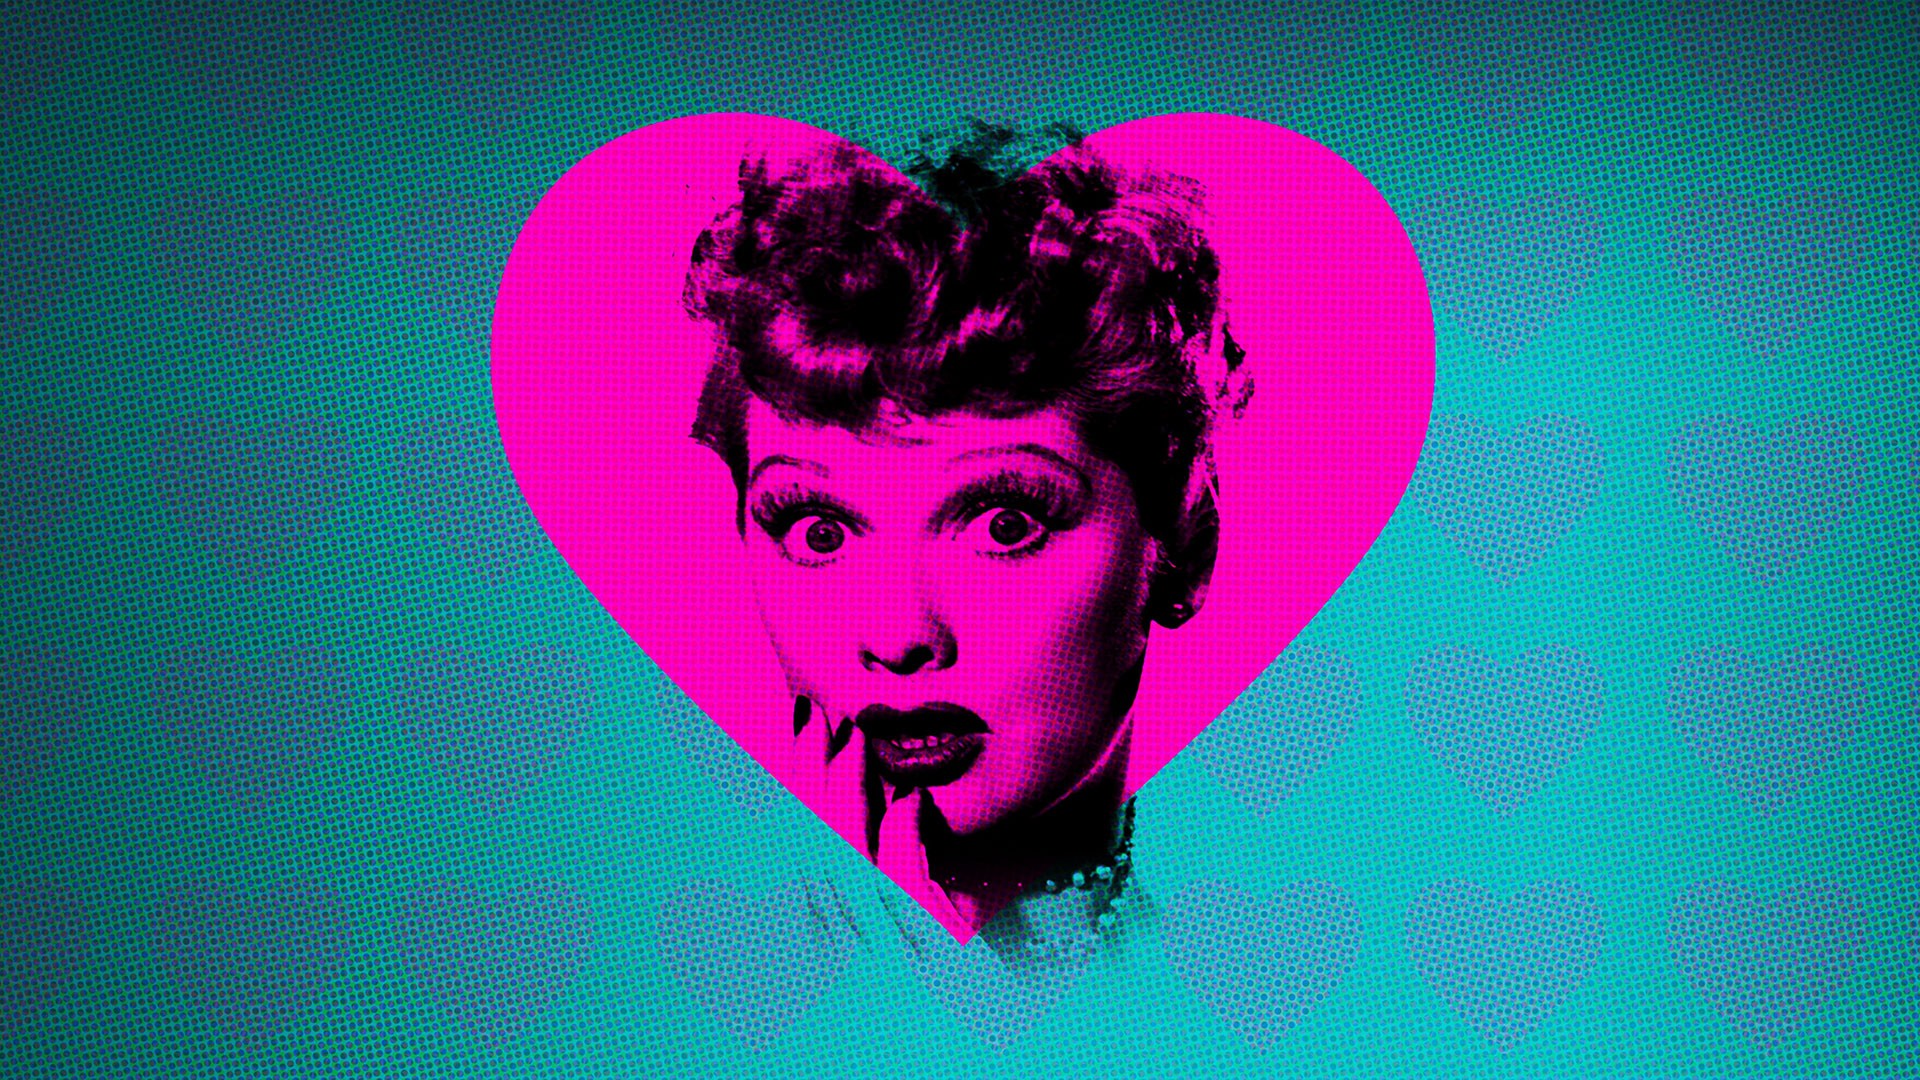 I Love Lucy background